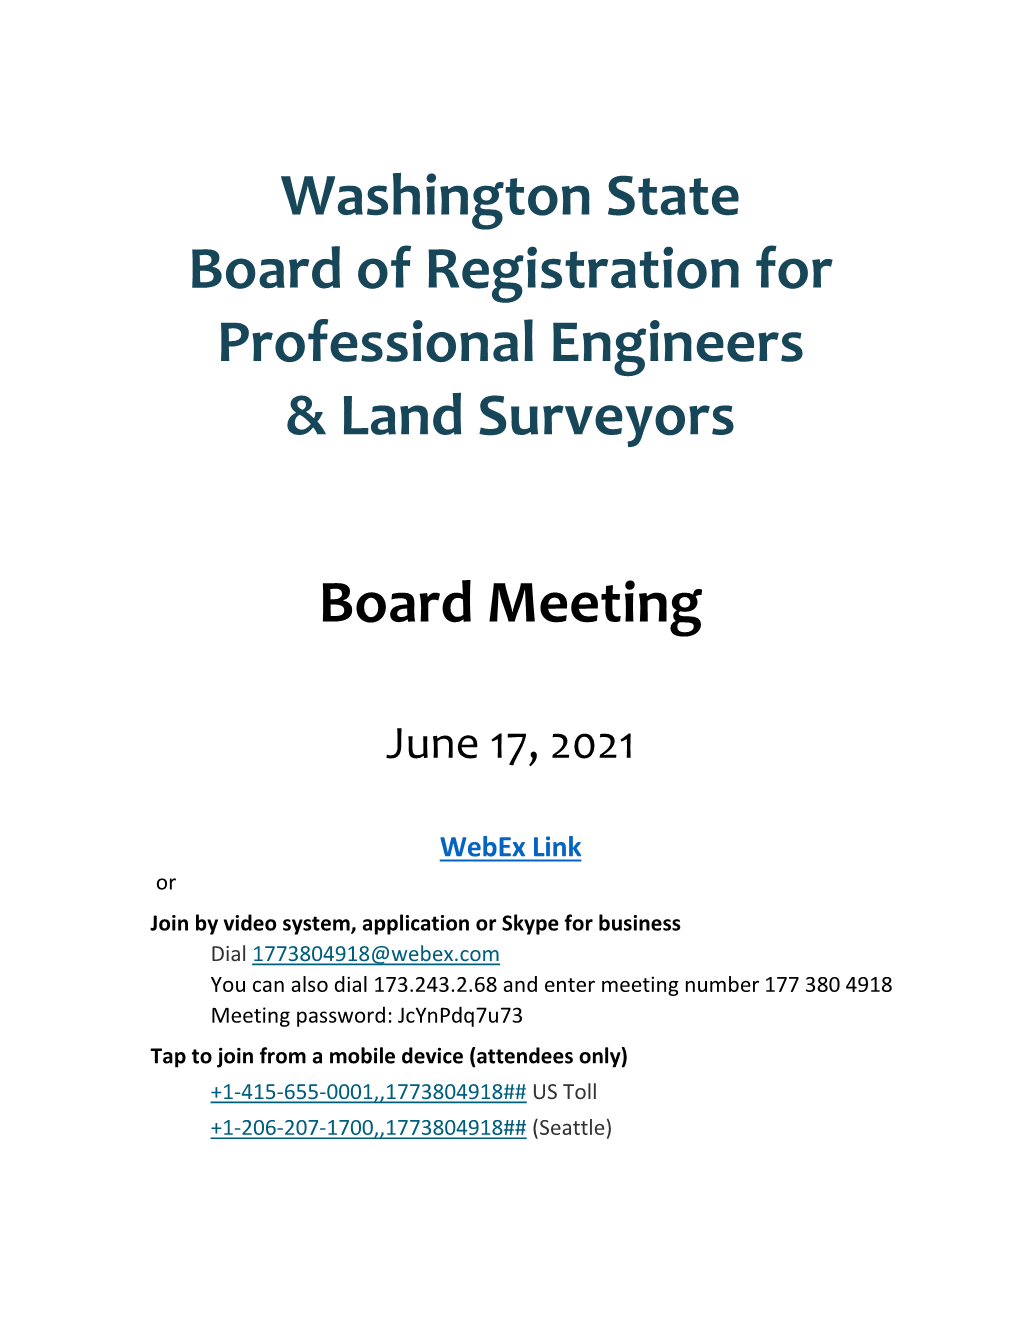 Washington State Board of Registration for Professional Engineers & Land Surveyors